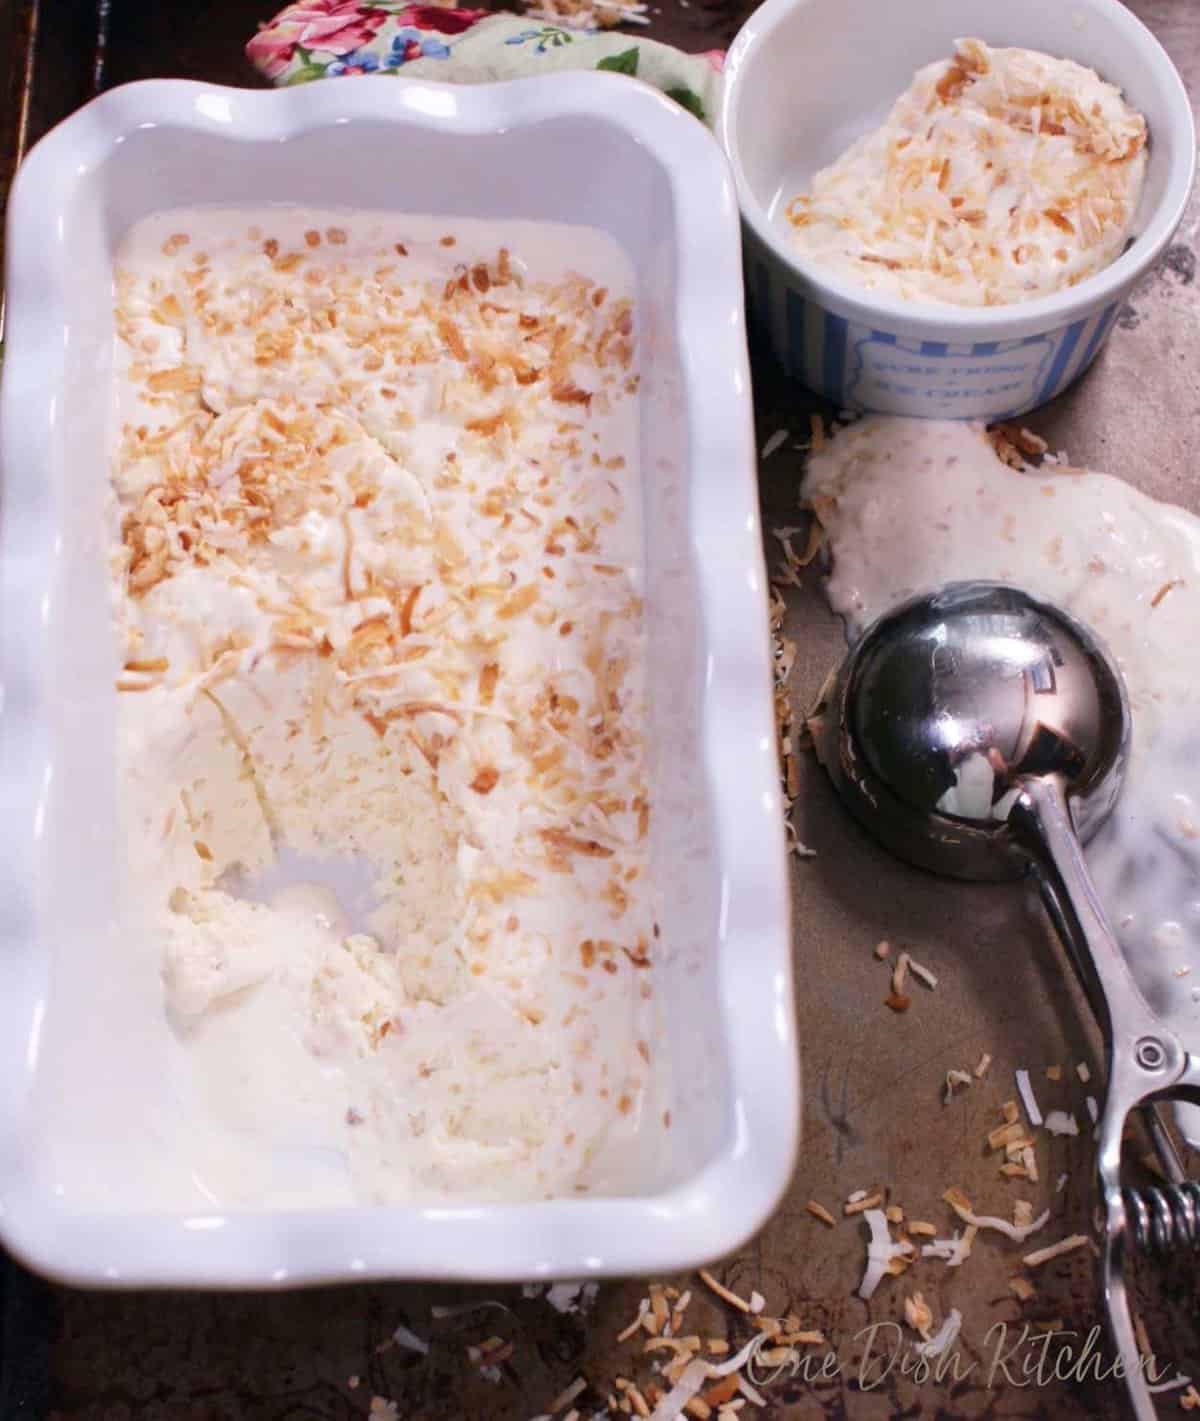 Toasted coconut ice cream in a loaf pan next to an ice cream scoop and a stack of two ice cream bowls.